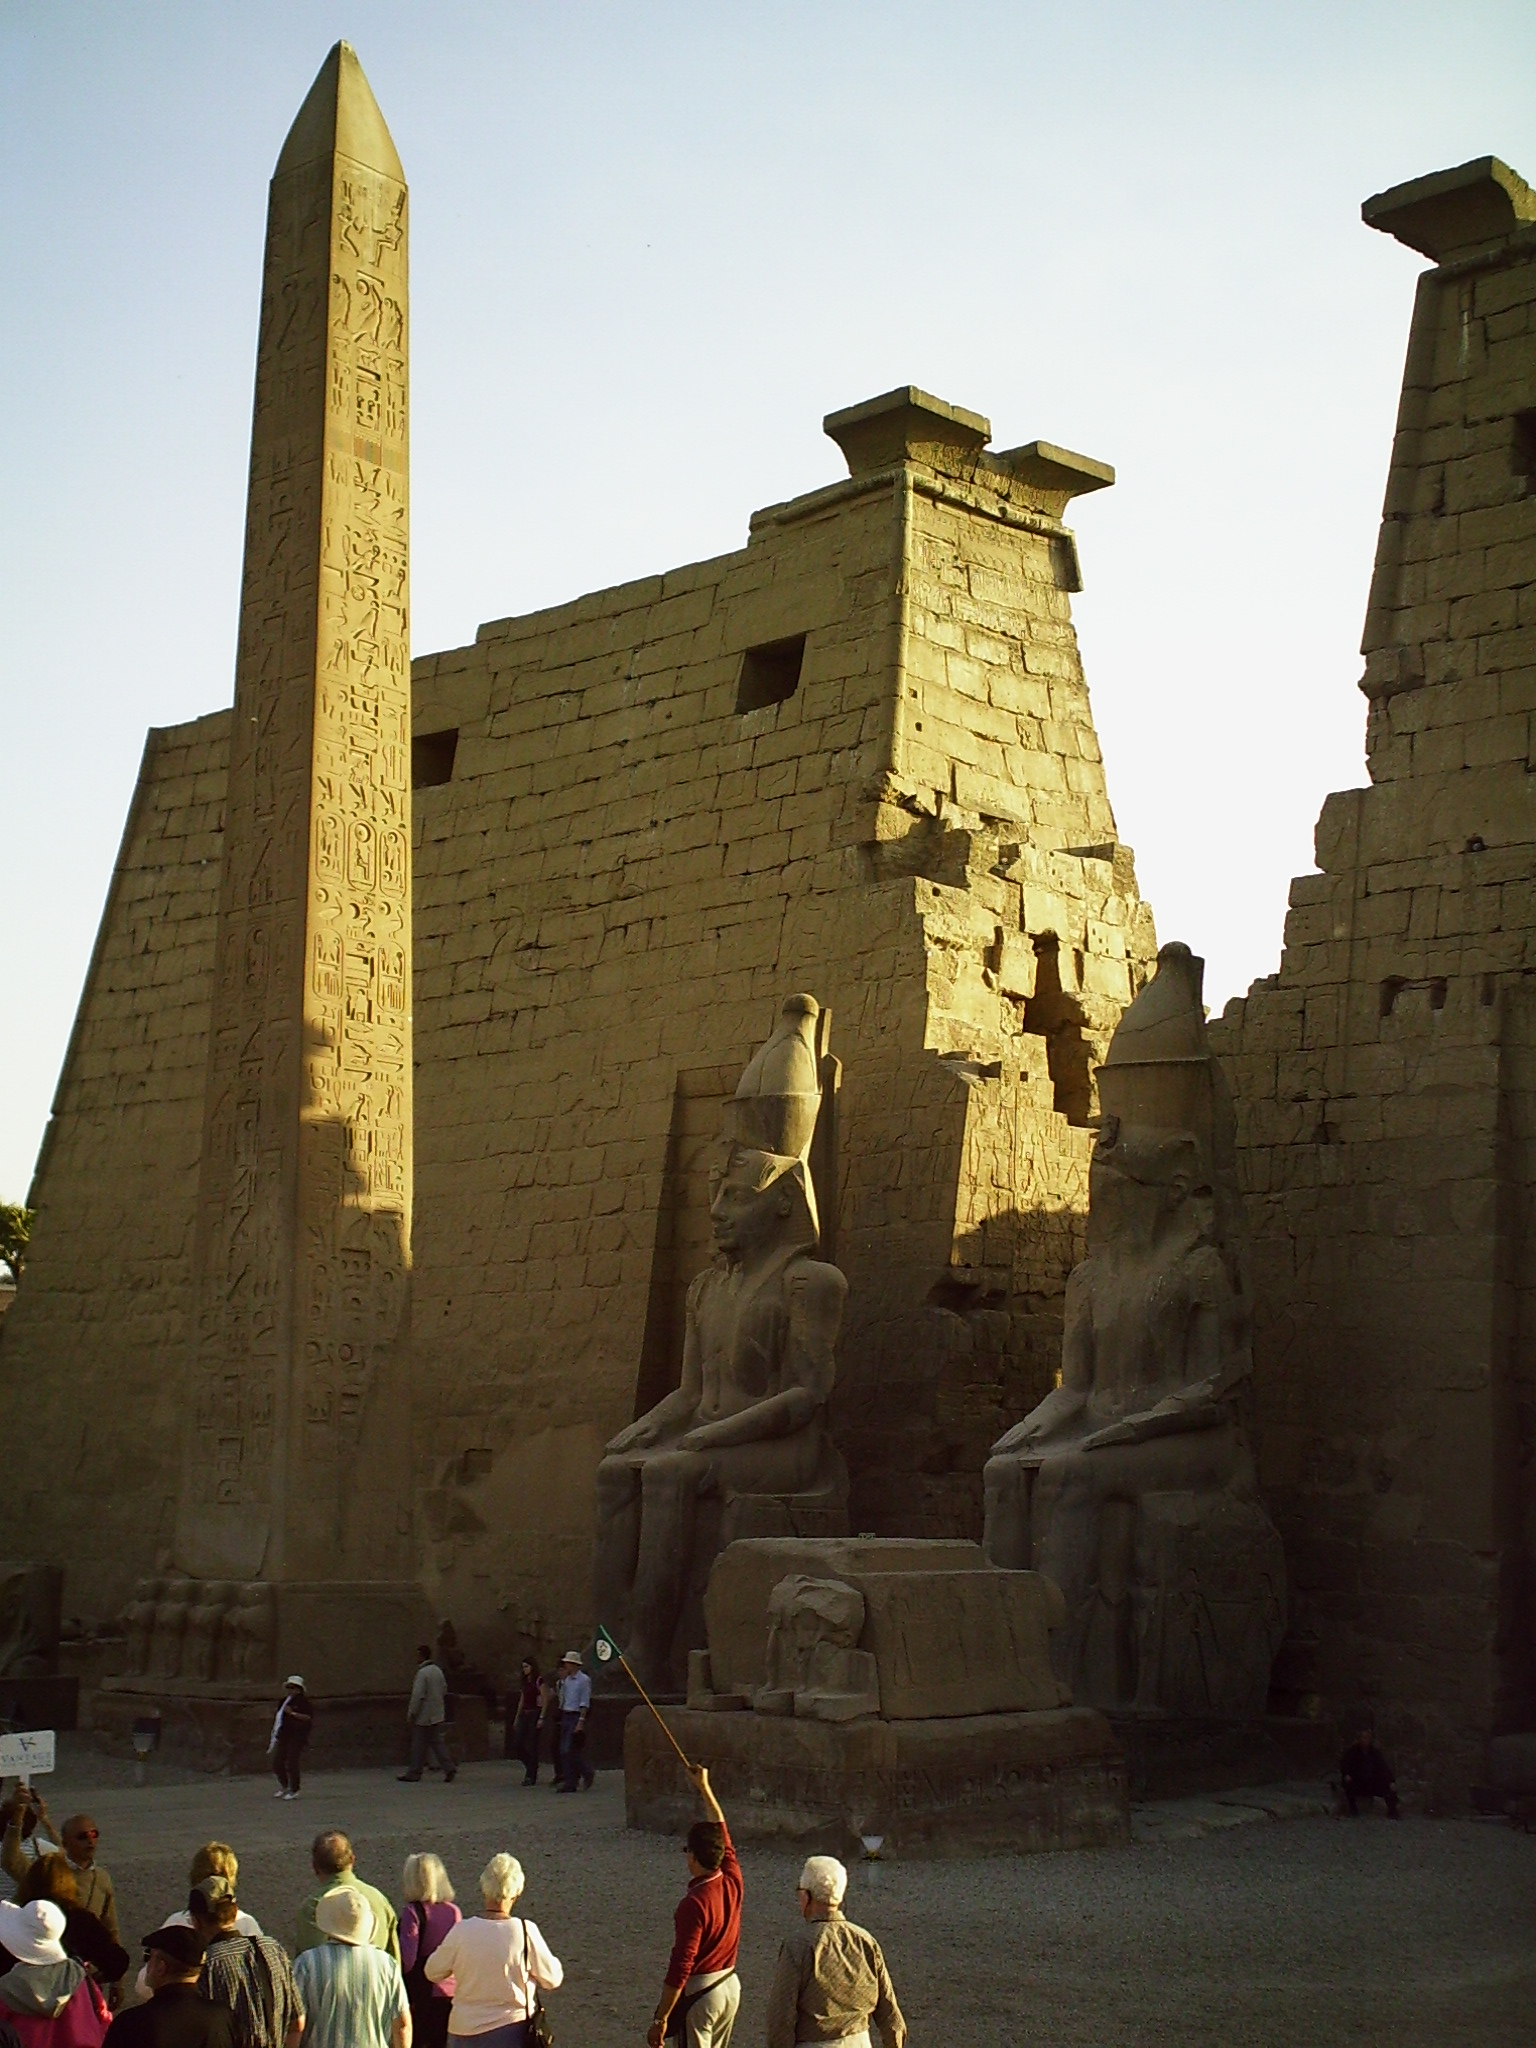  At the Temple of Luxor complex 